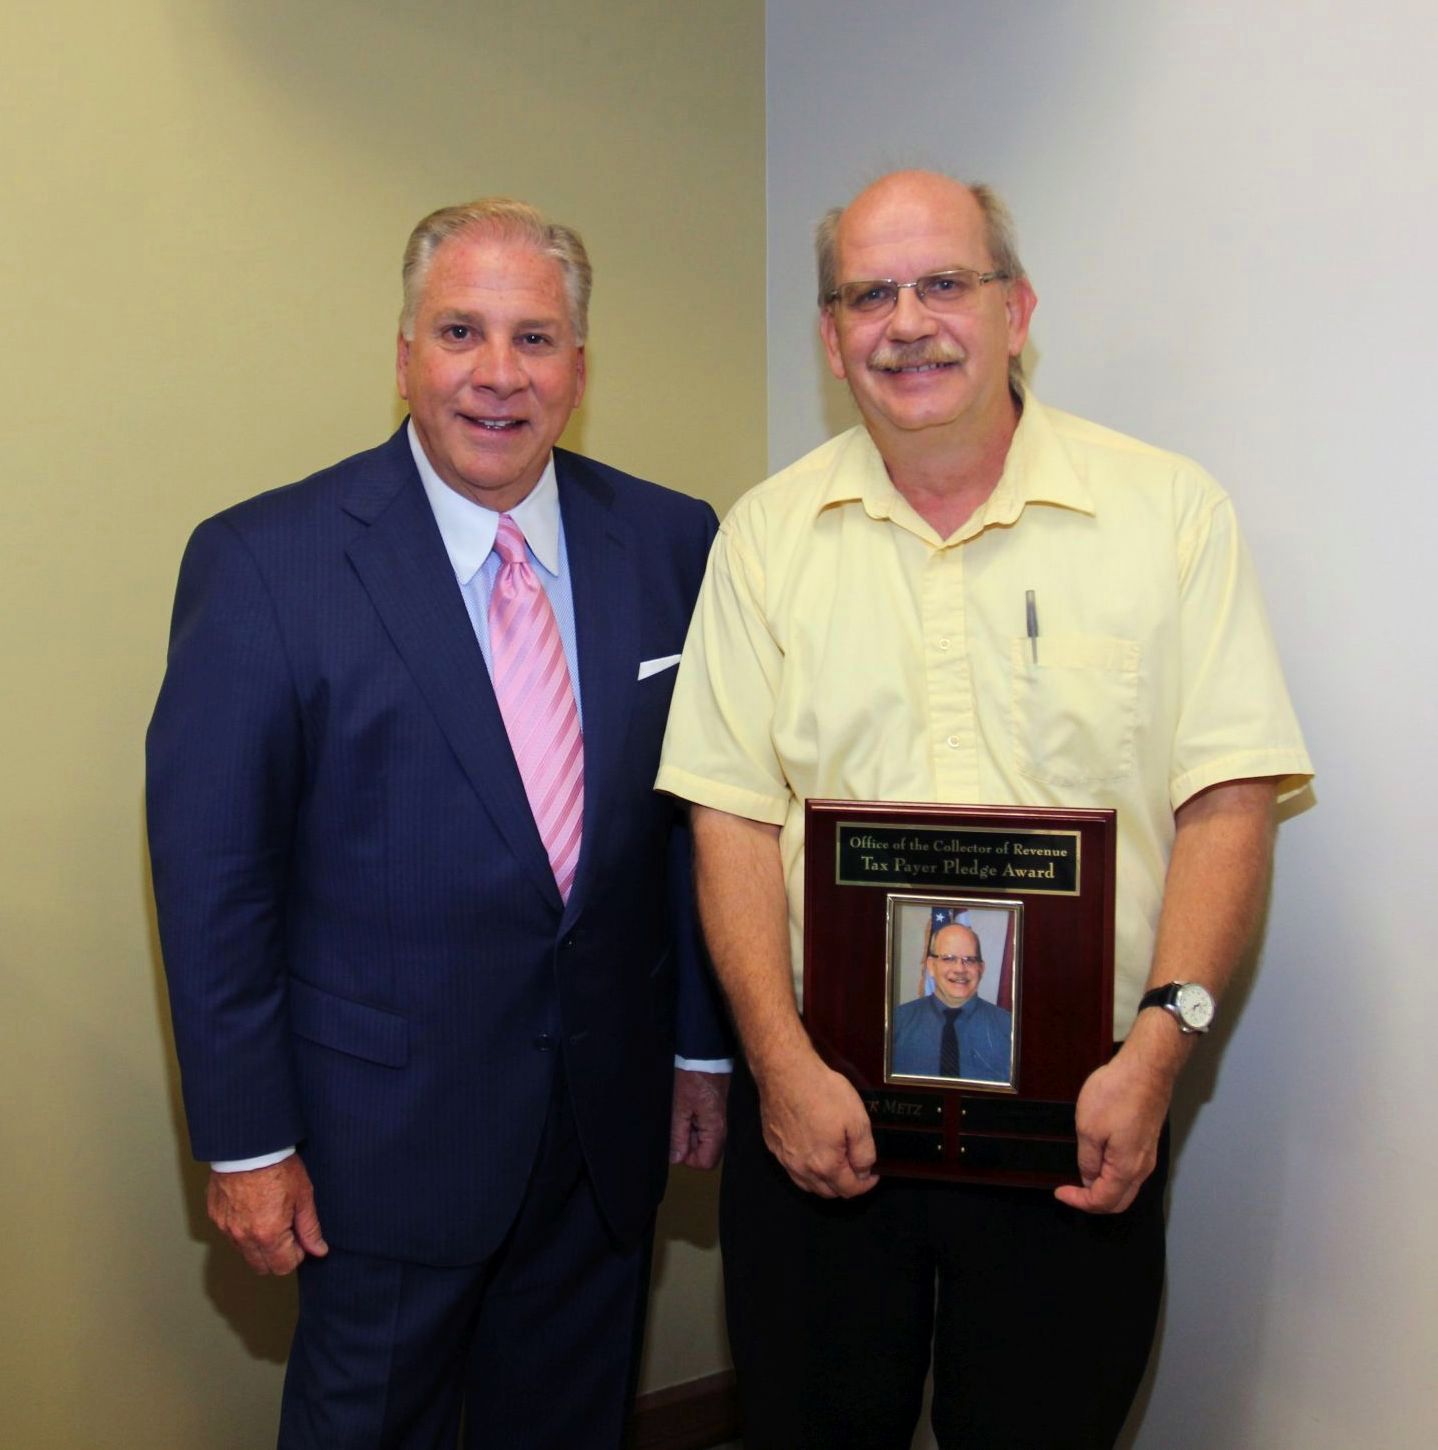 Collector of Revenue Gregory F.X. Daly presents Rick Metz with the Taxpayer Pledge Award